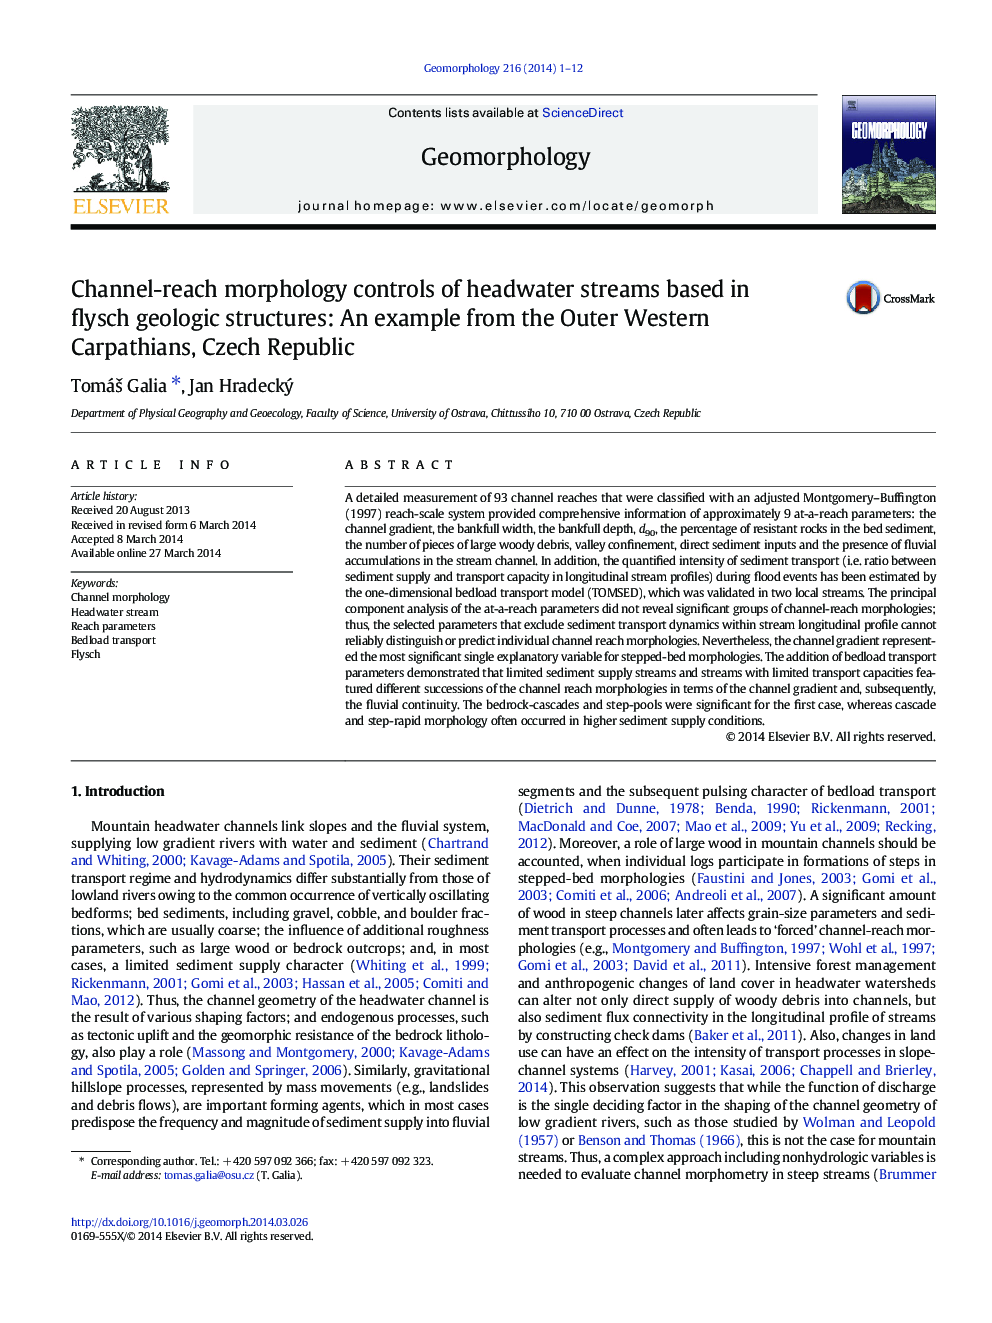 Channel-reach morphology controls of headwater streams based in flysch geologic structures: An example from the Outer Western Carpathians, Czech Republic